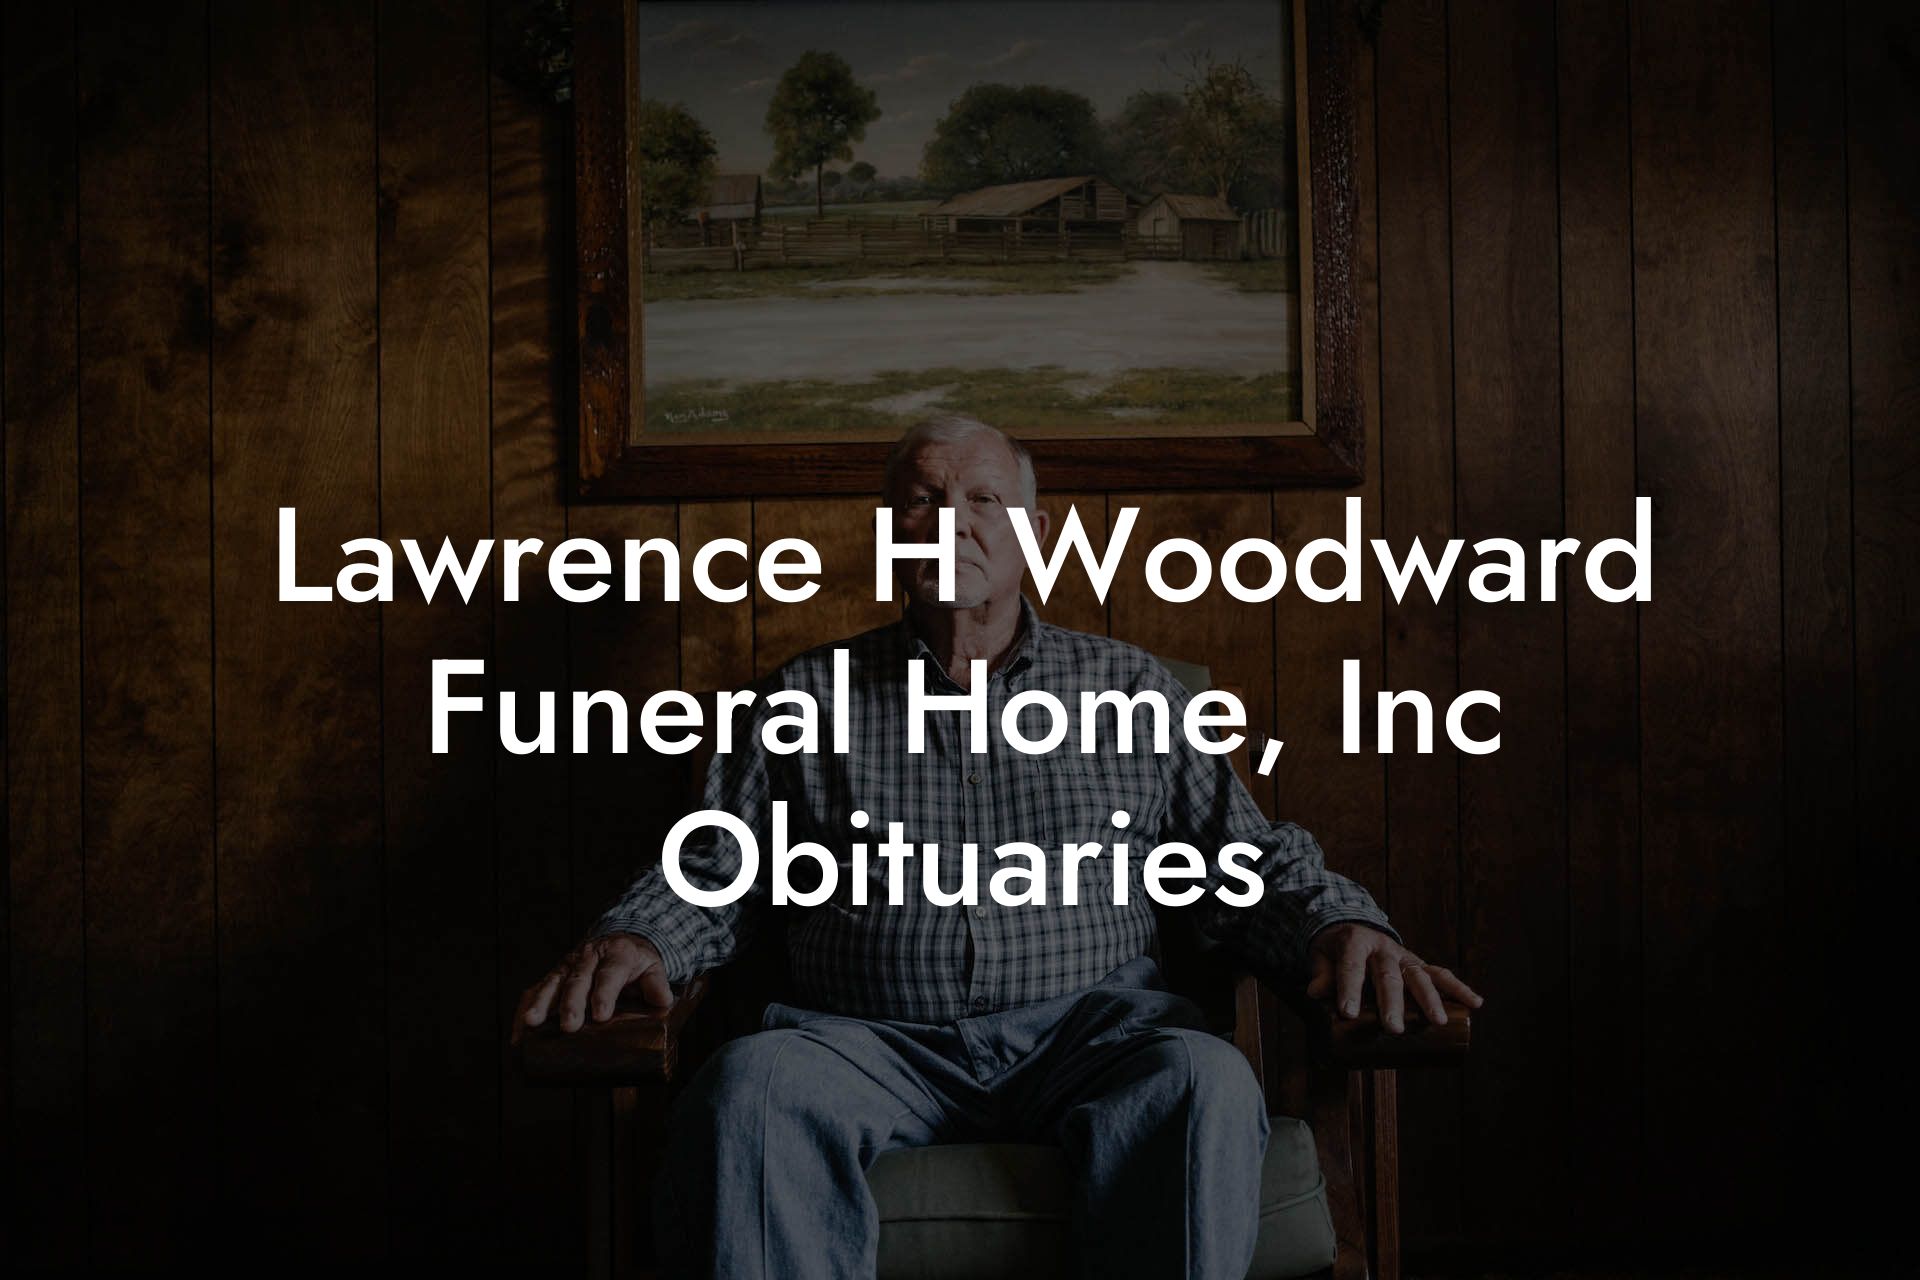 Lawrence H Woodward Funeral Home, Inc Obituaries